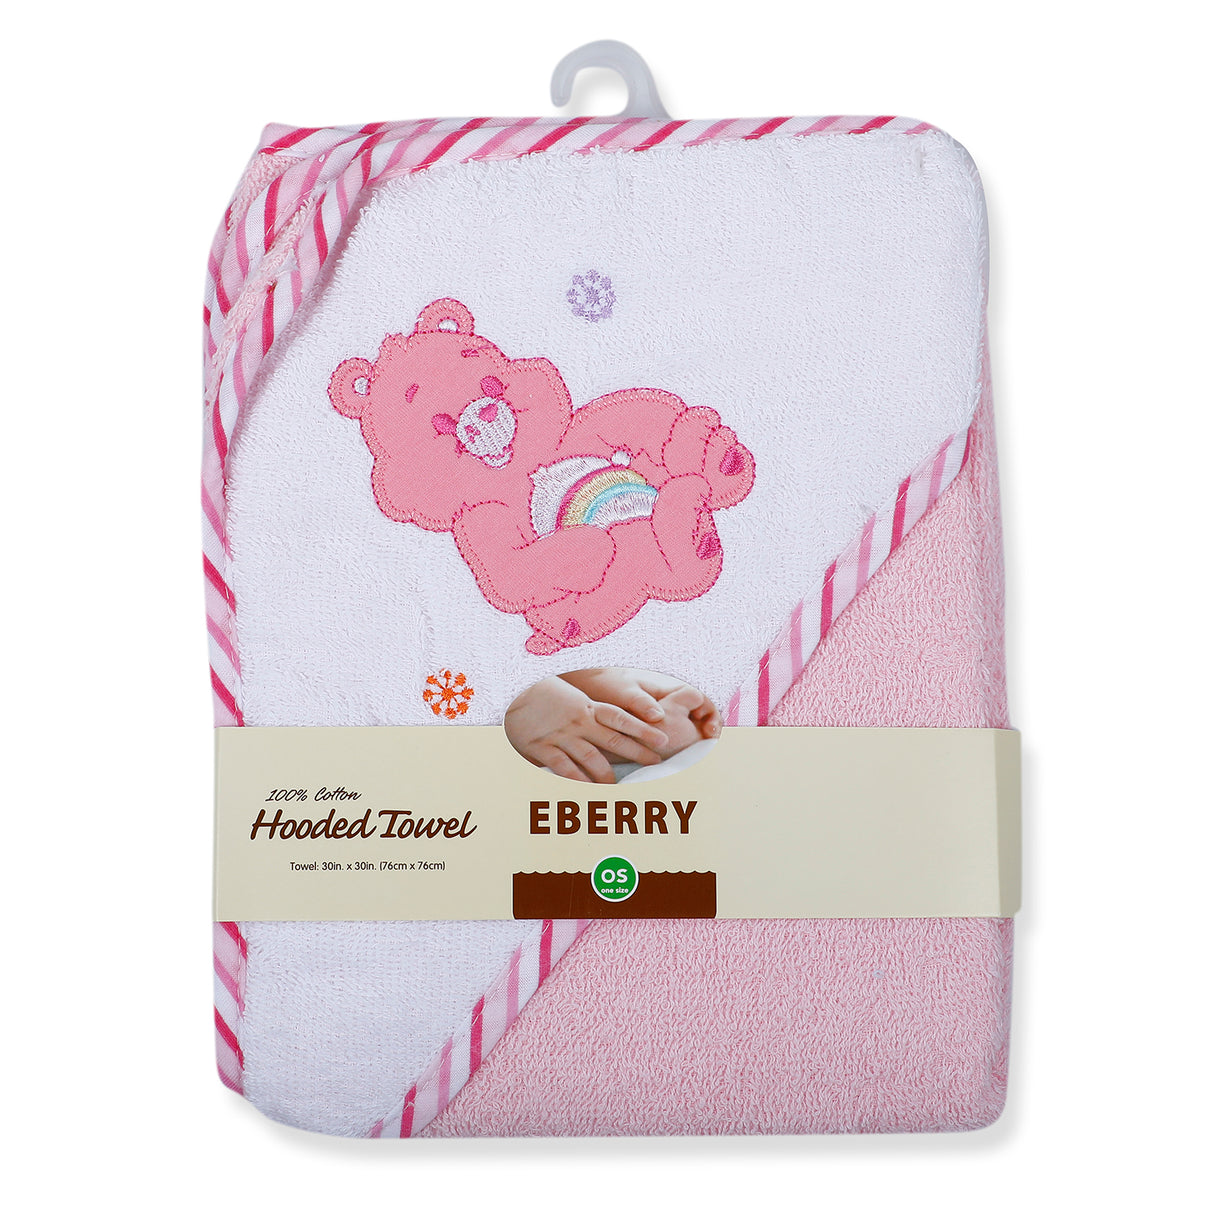 EBERRY Extra Soft Hooded Towel